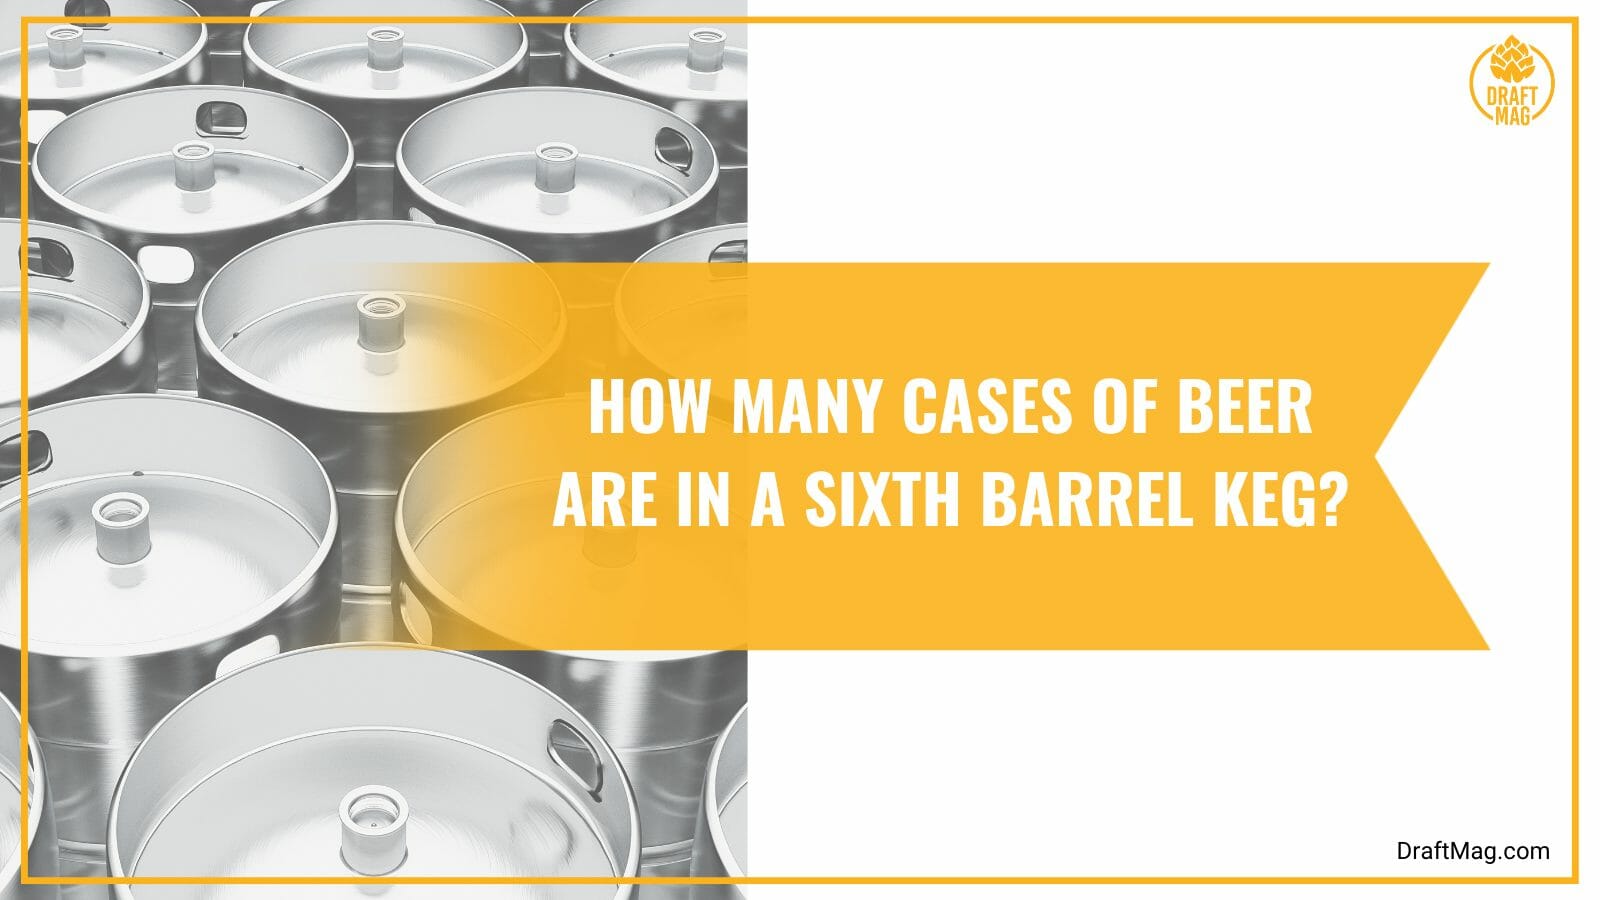 Cases of beer in a sixth barrel keg